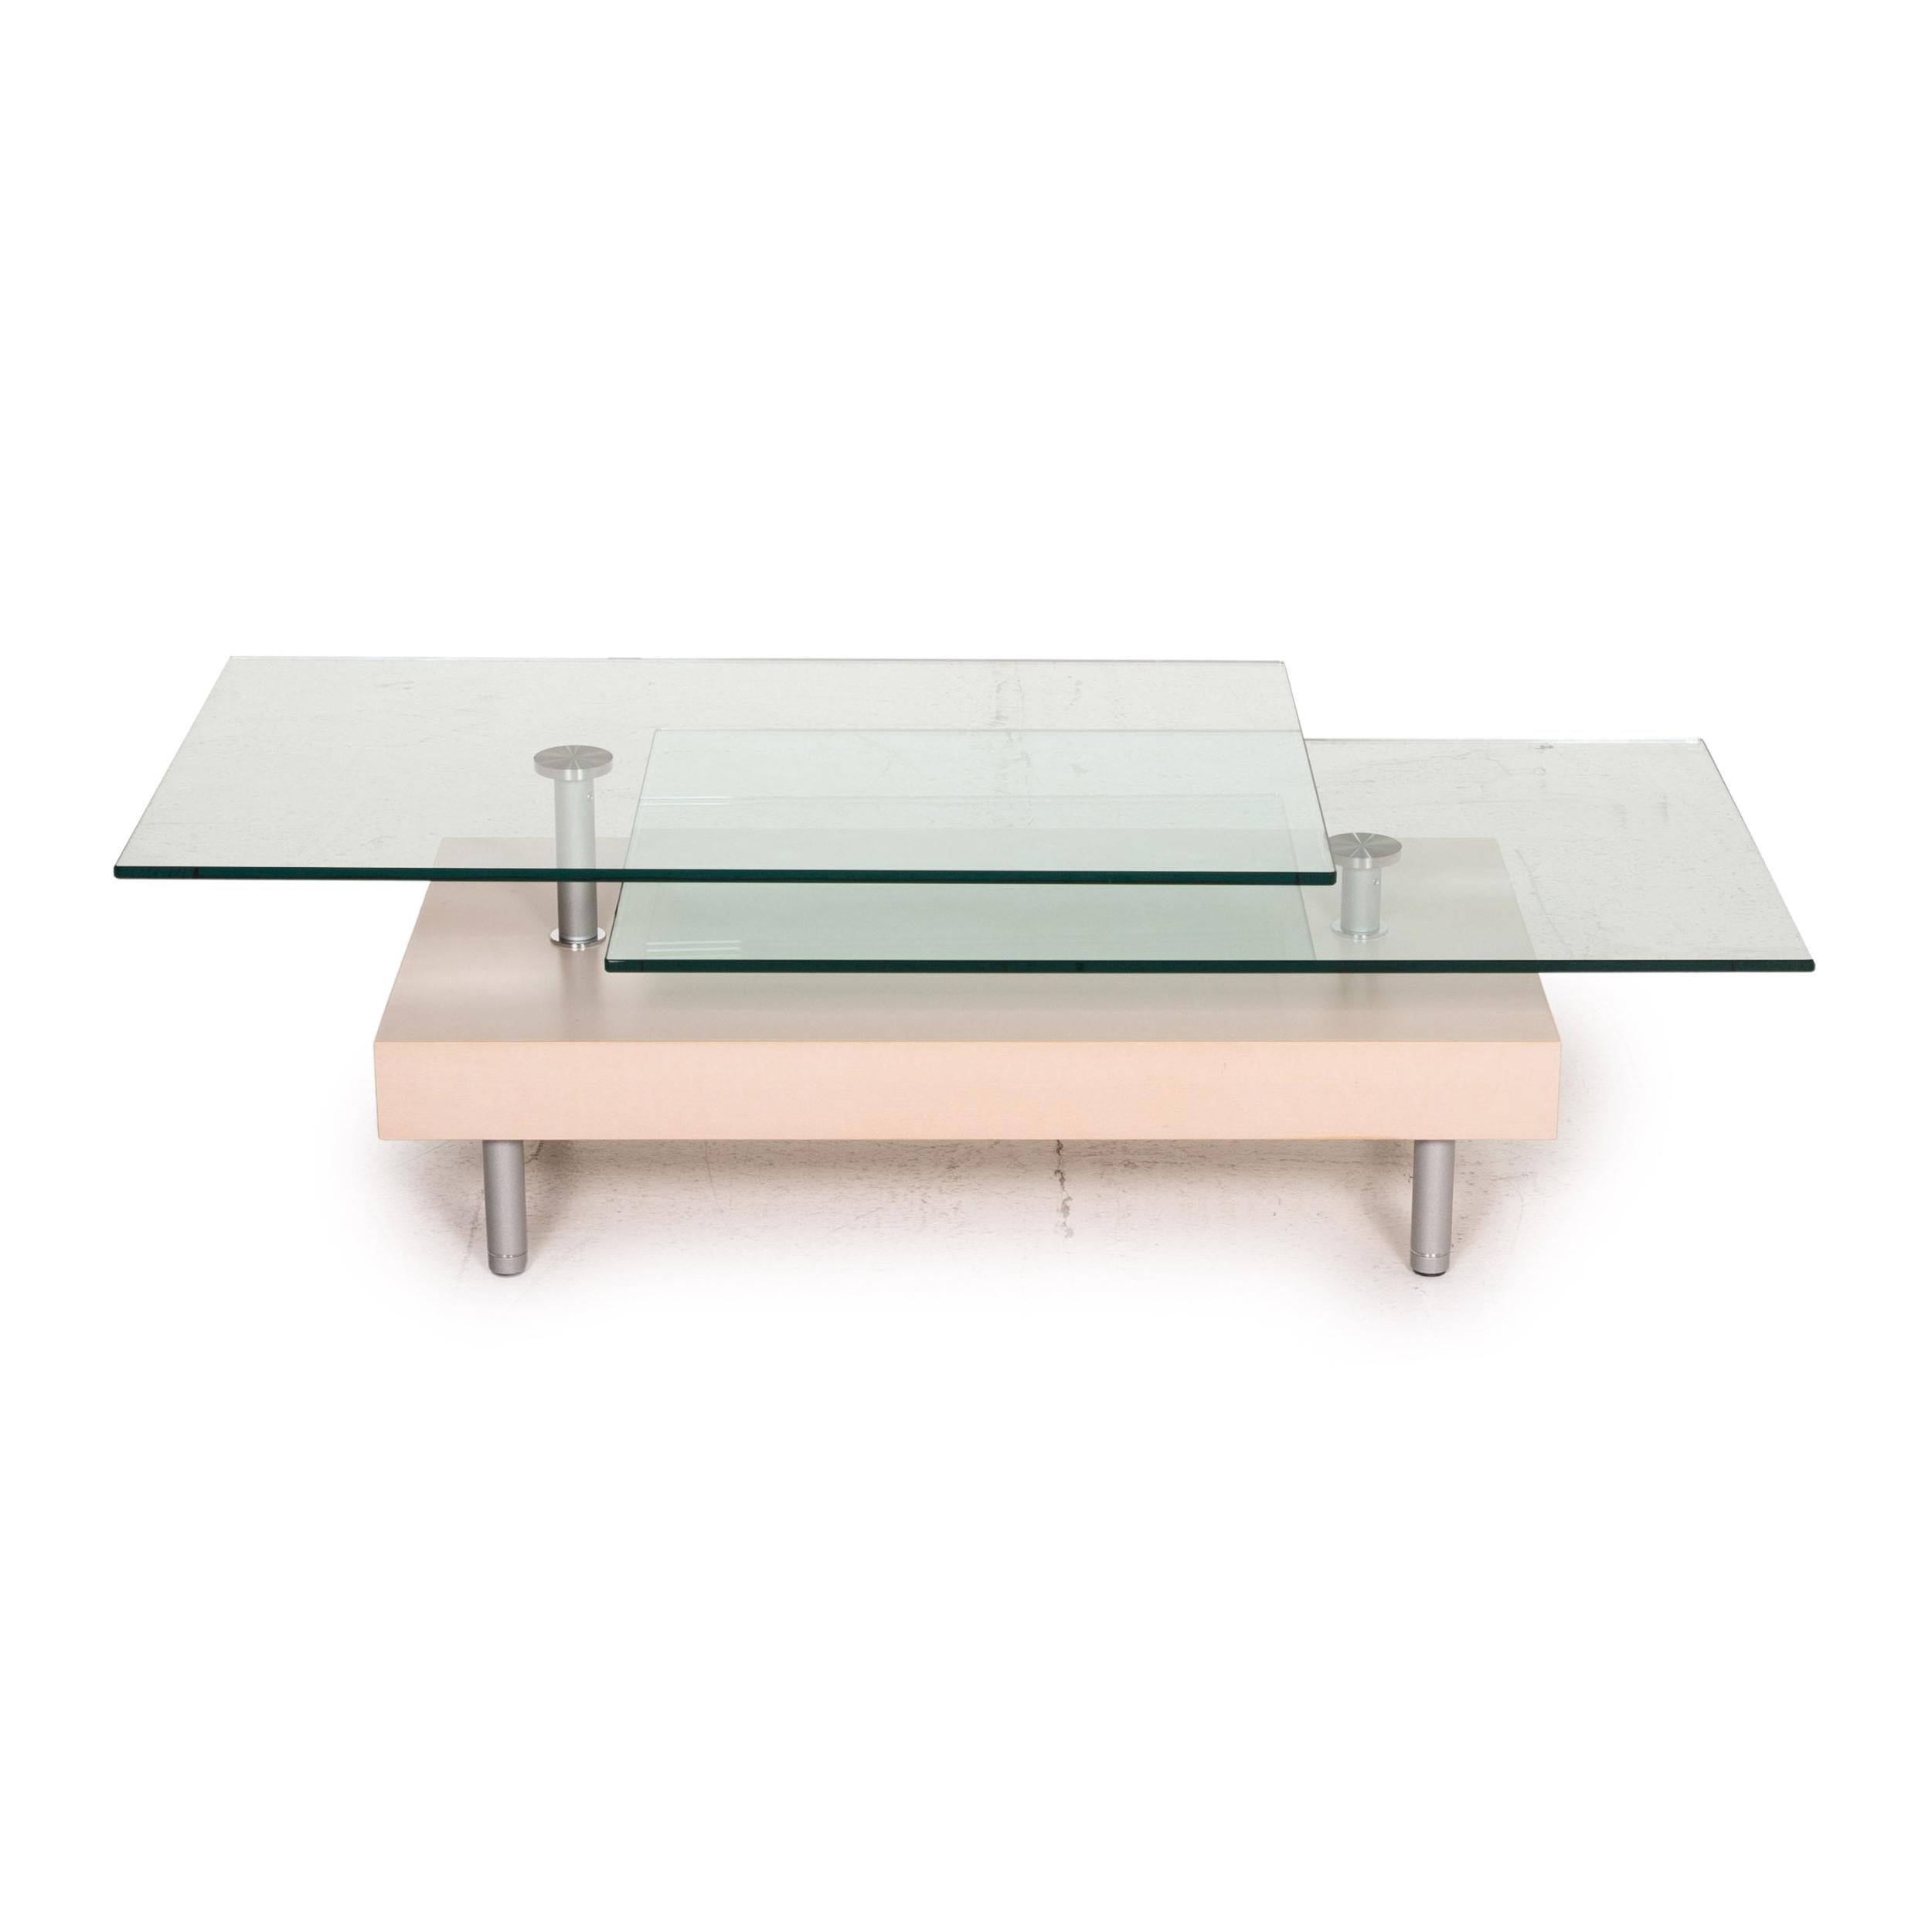 Rolf Benz Glass Coffee Table Beige Function 1